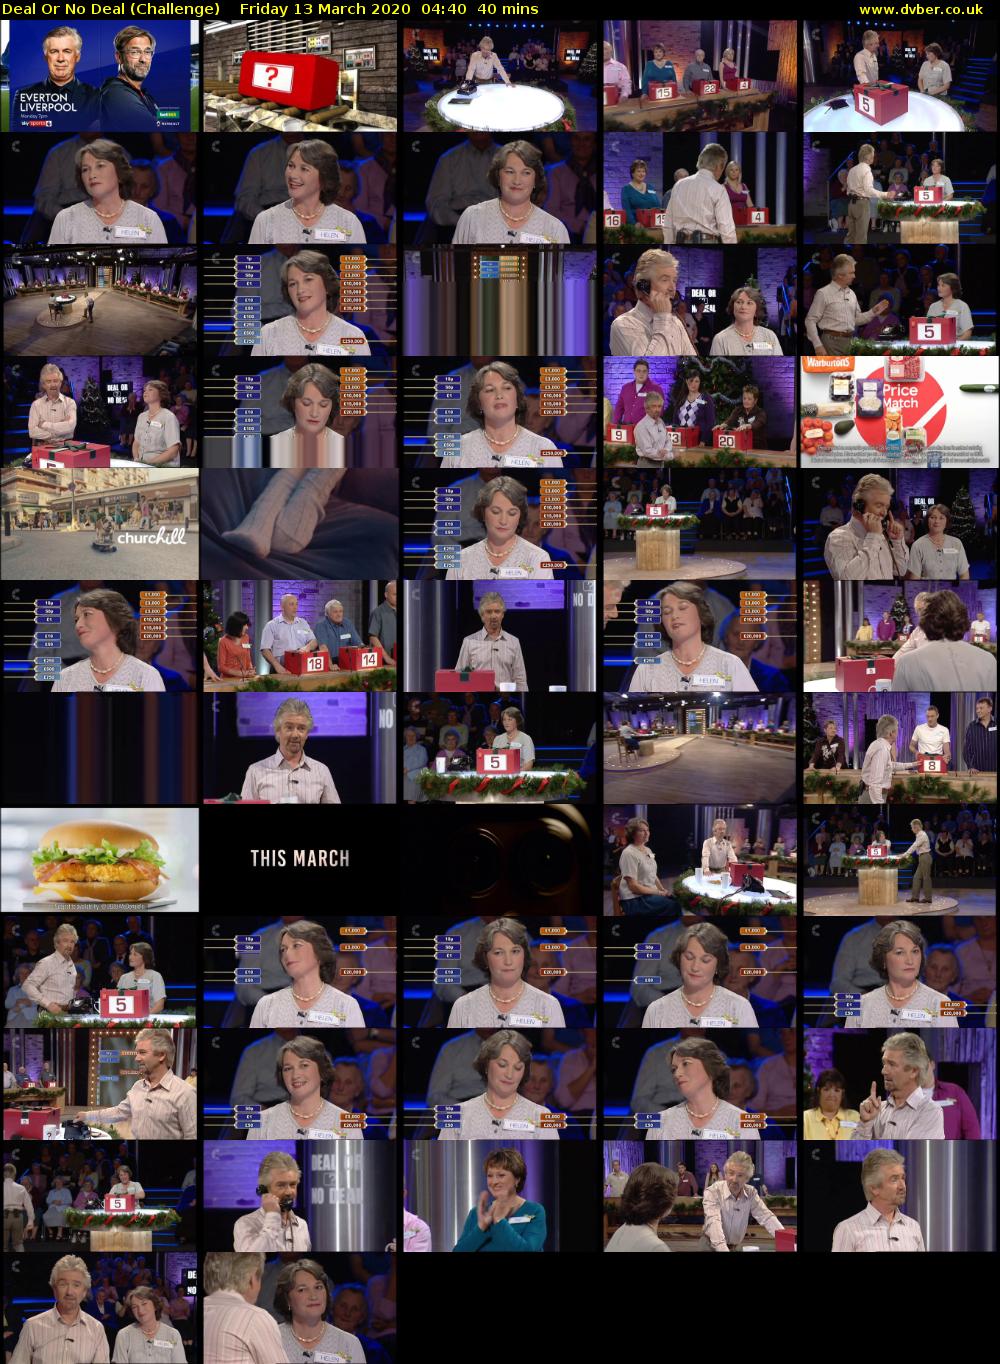 Deal Or No Deal (Challenge) Friday 13 March 2020 04:40 - 05:20